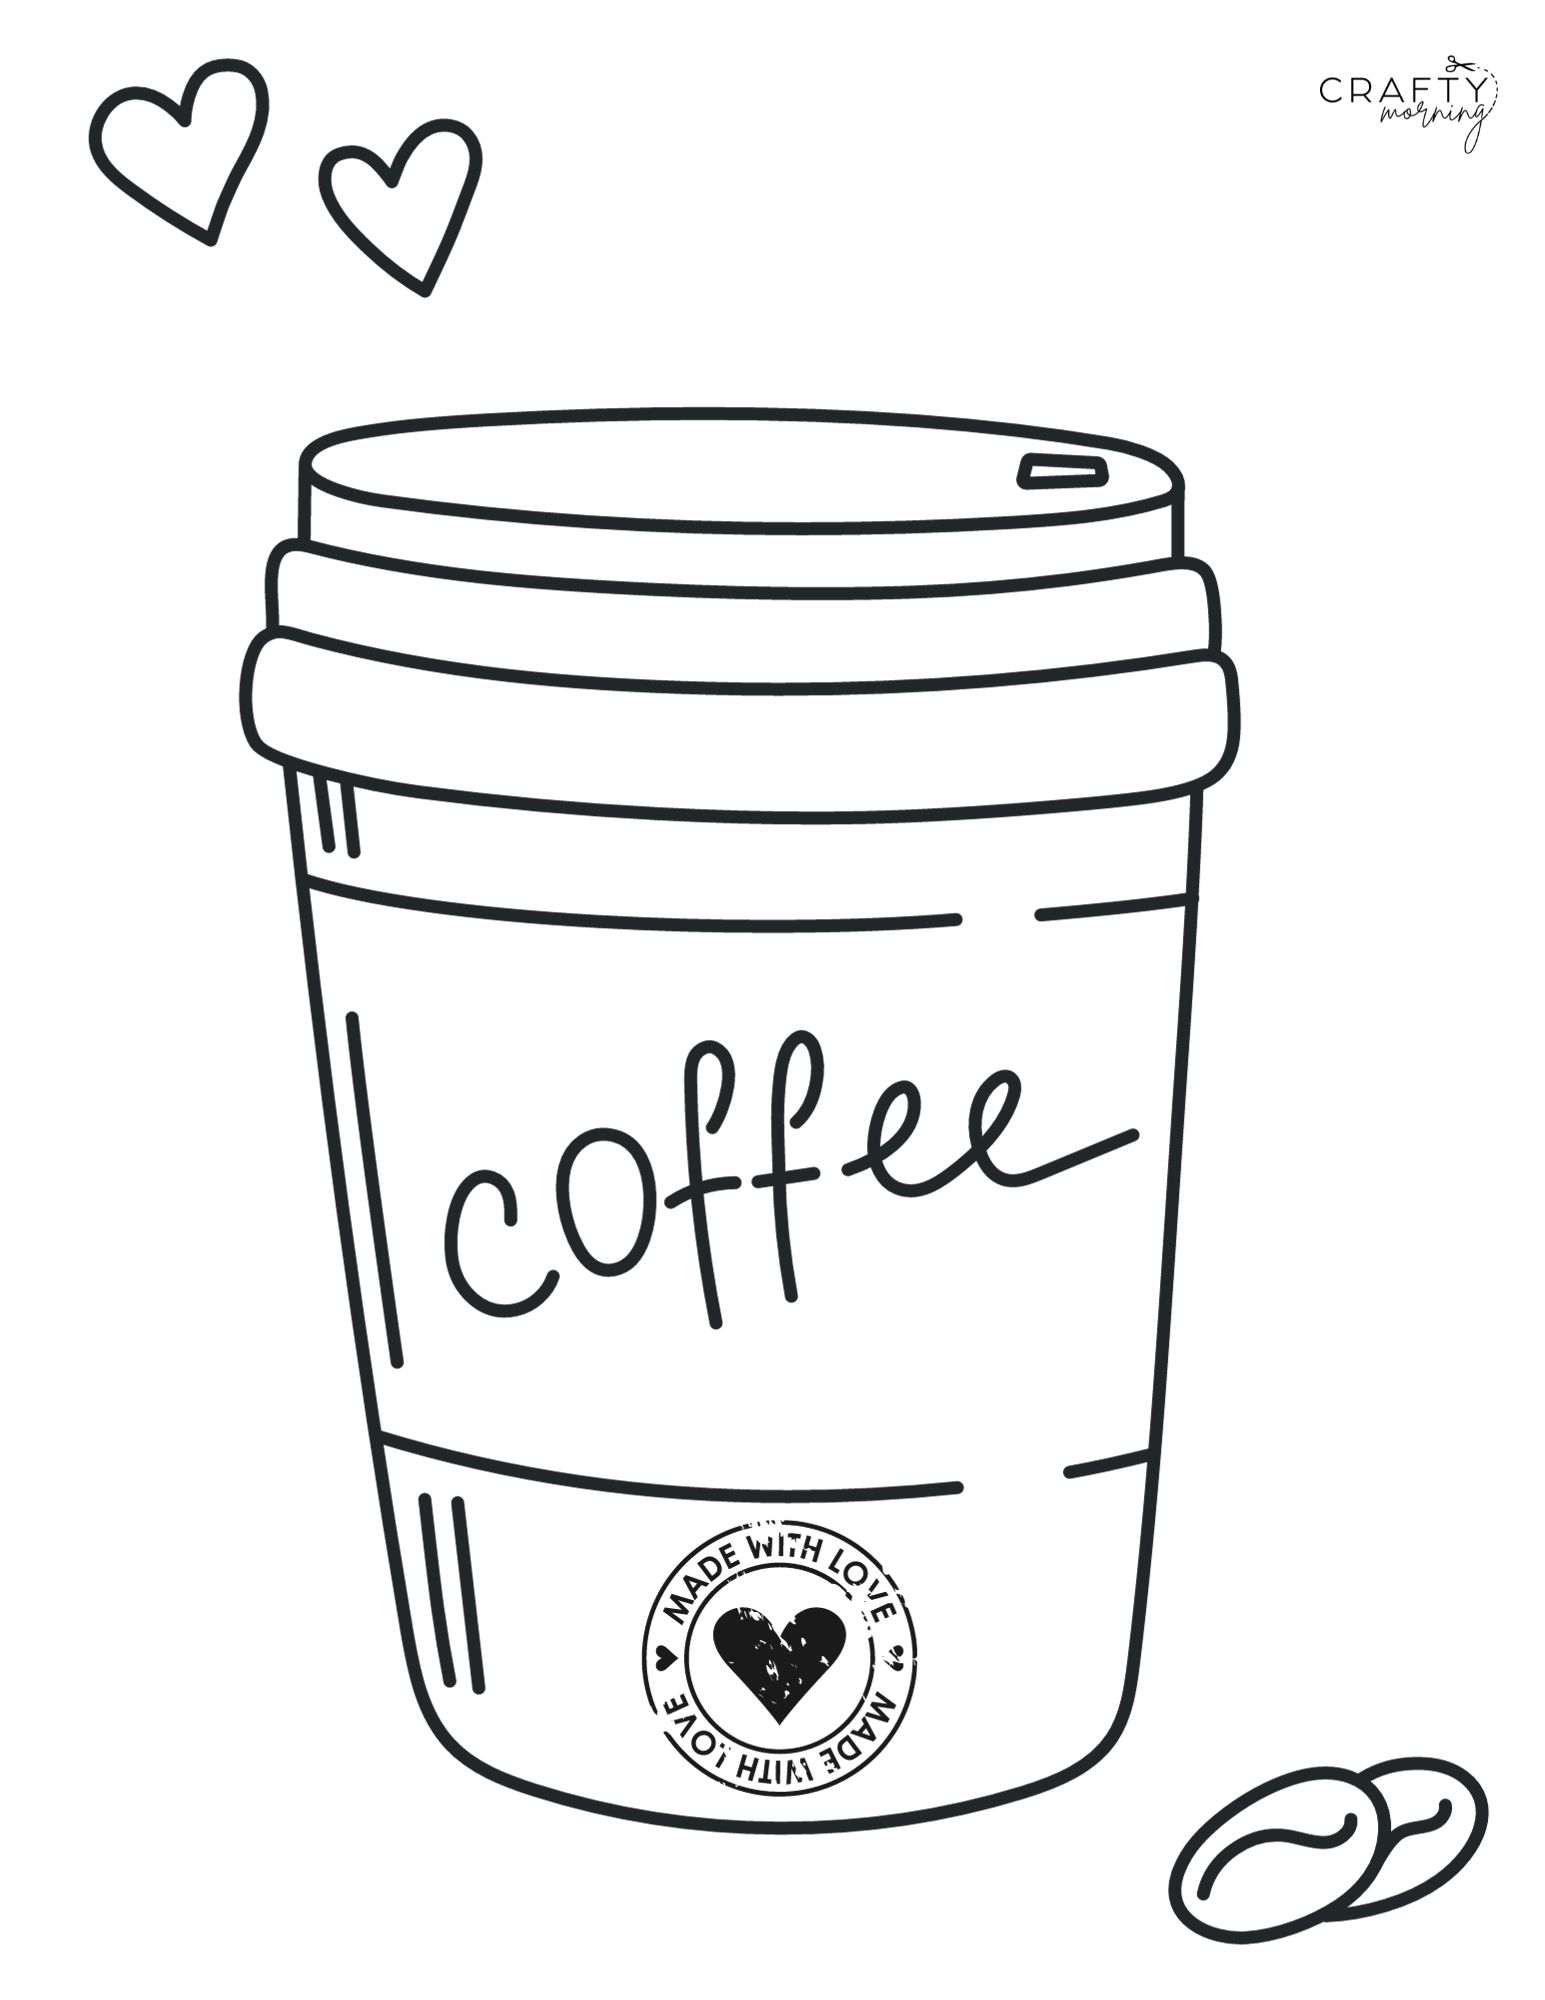 Coffee coloring pages to print